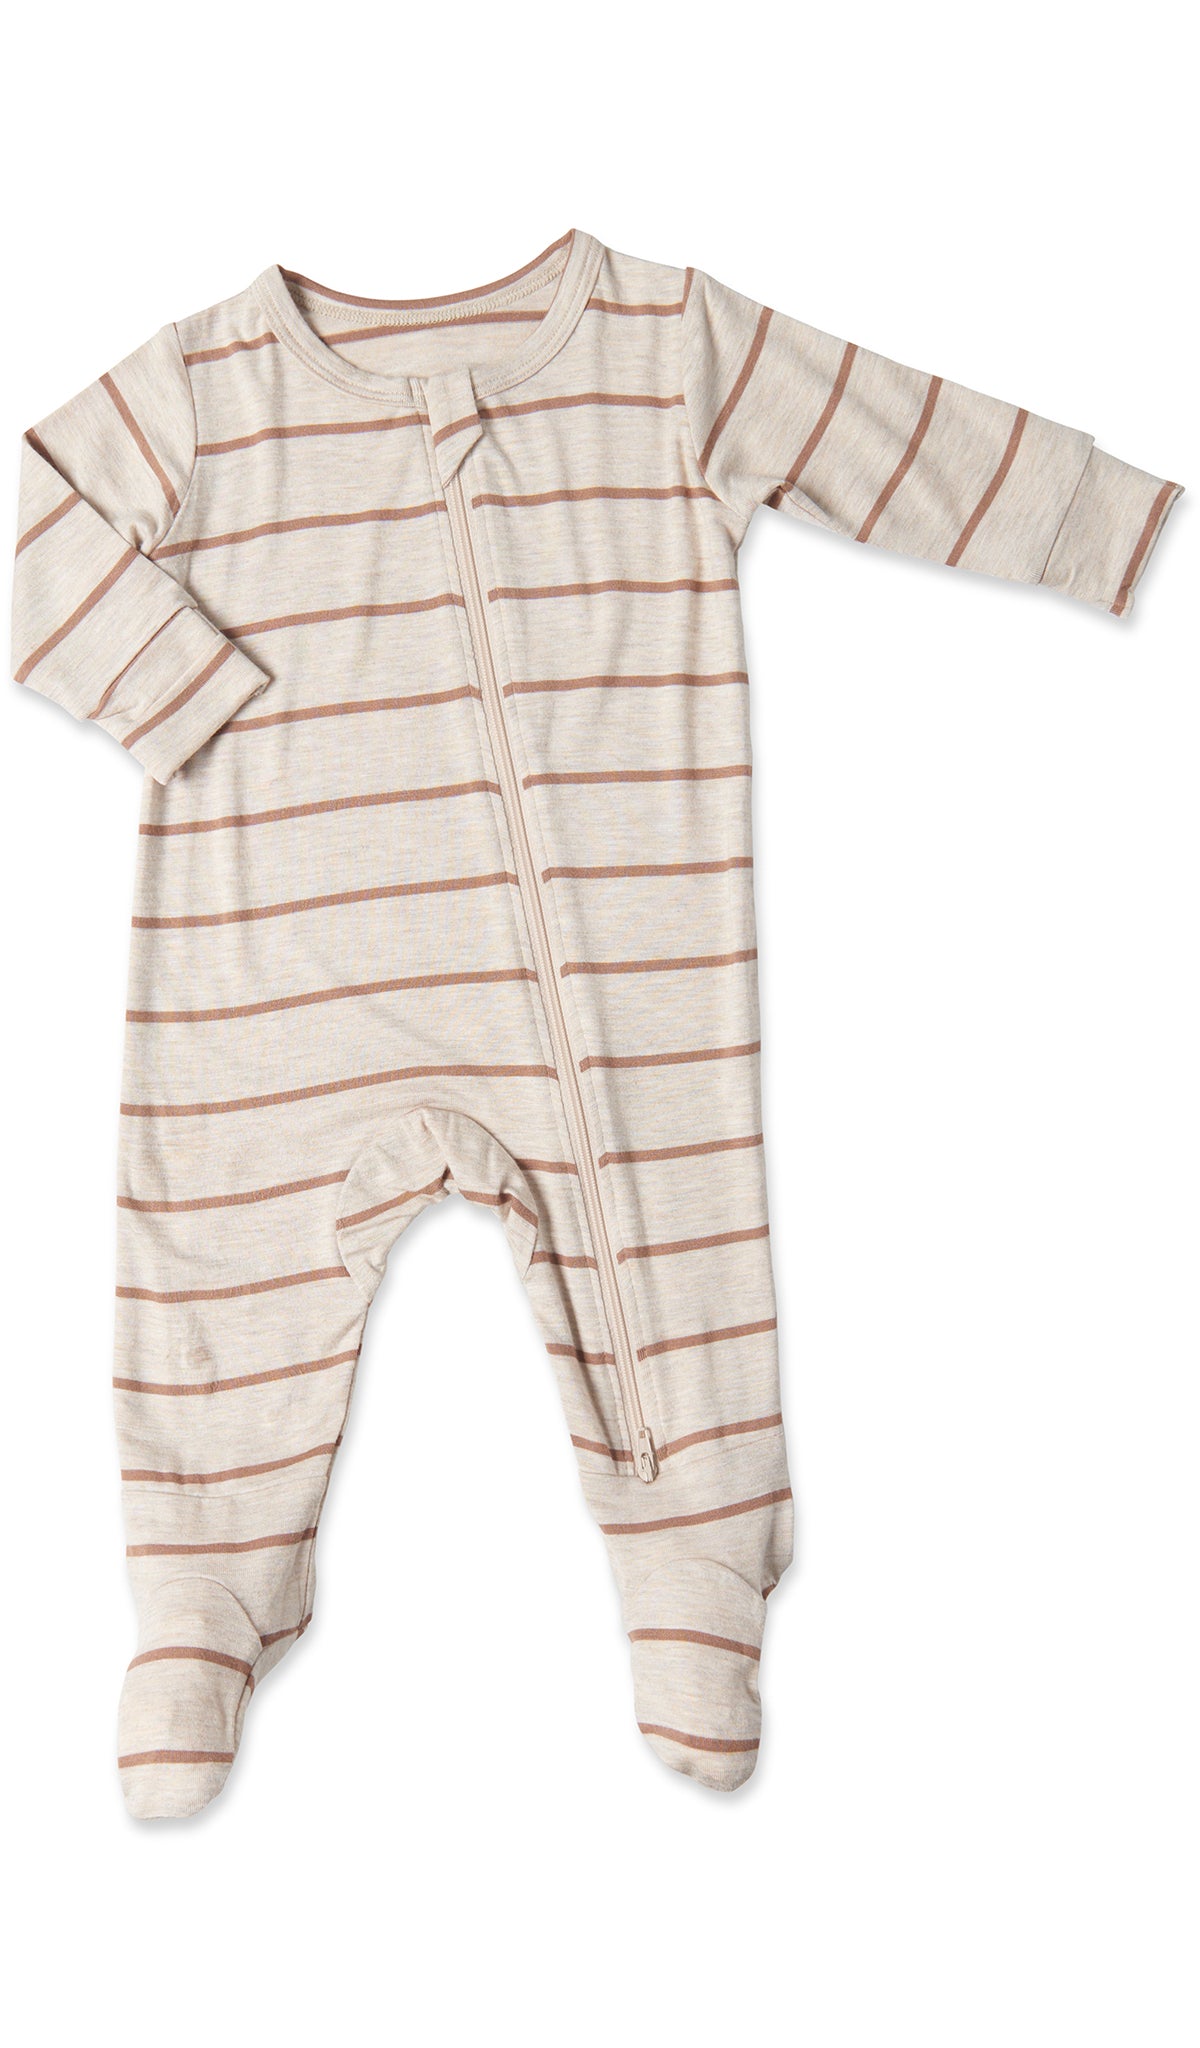 Mocha Stripe Footie with long sleeves and zip front.